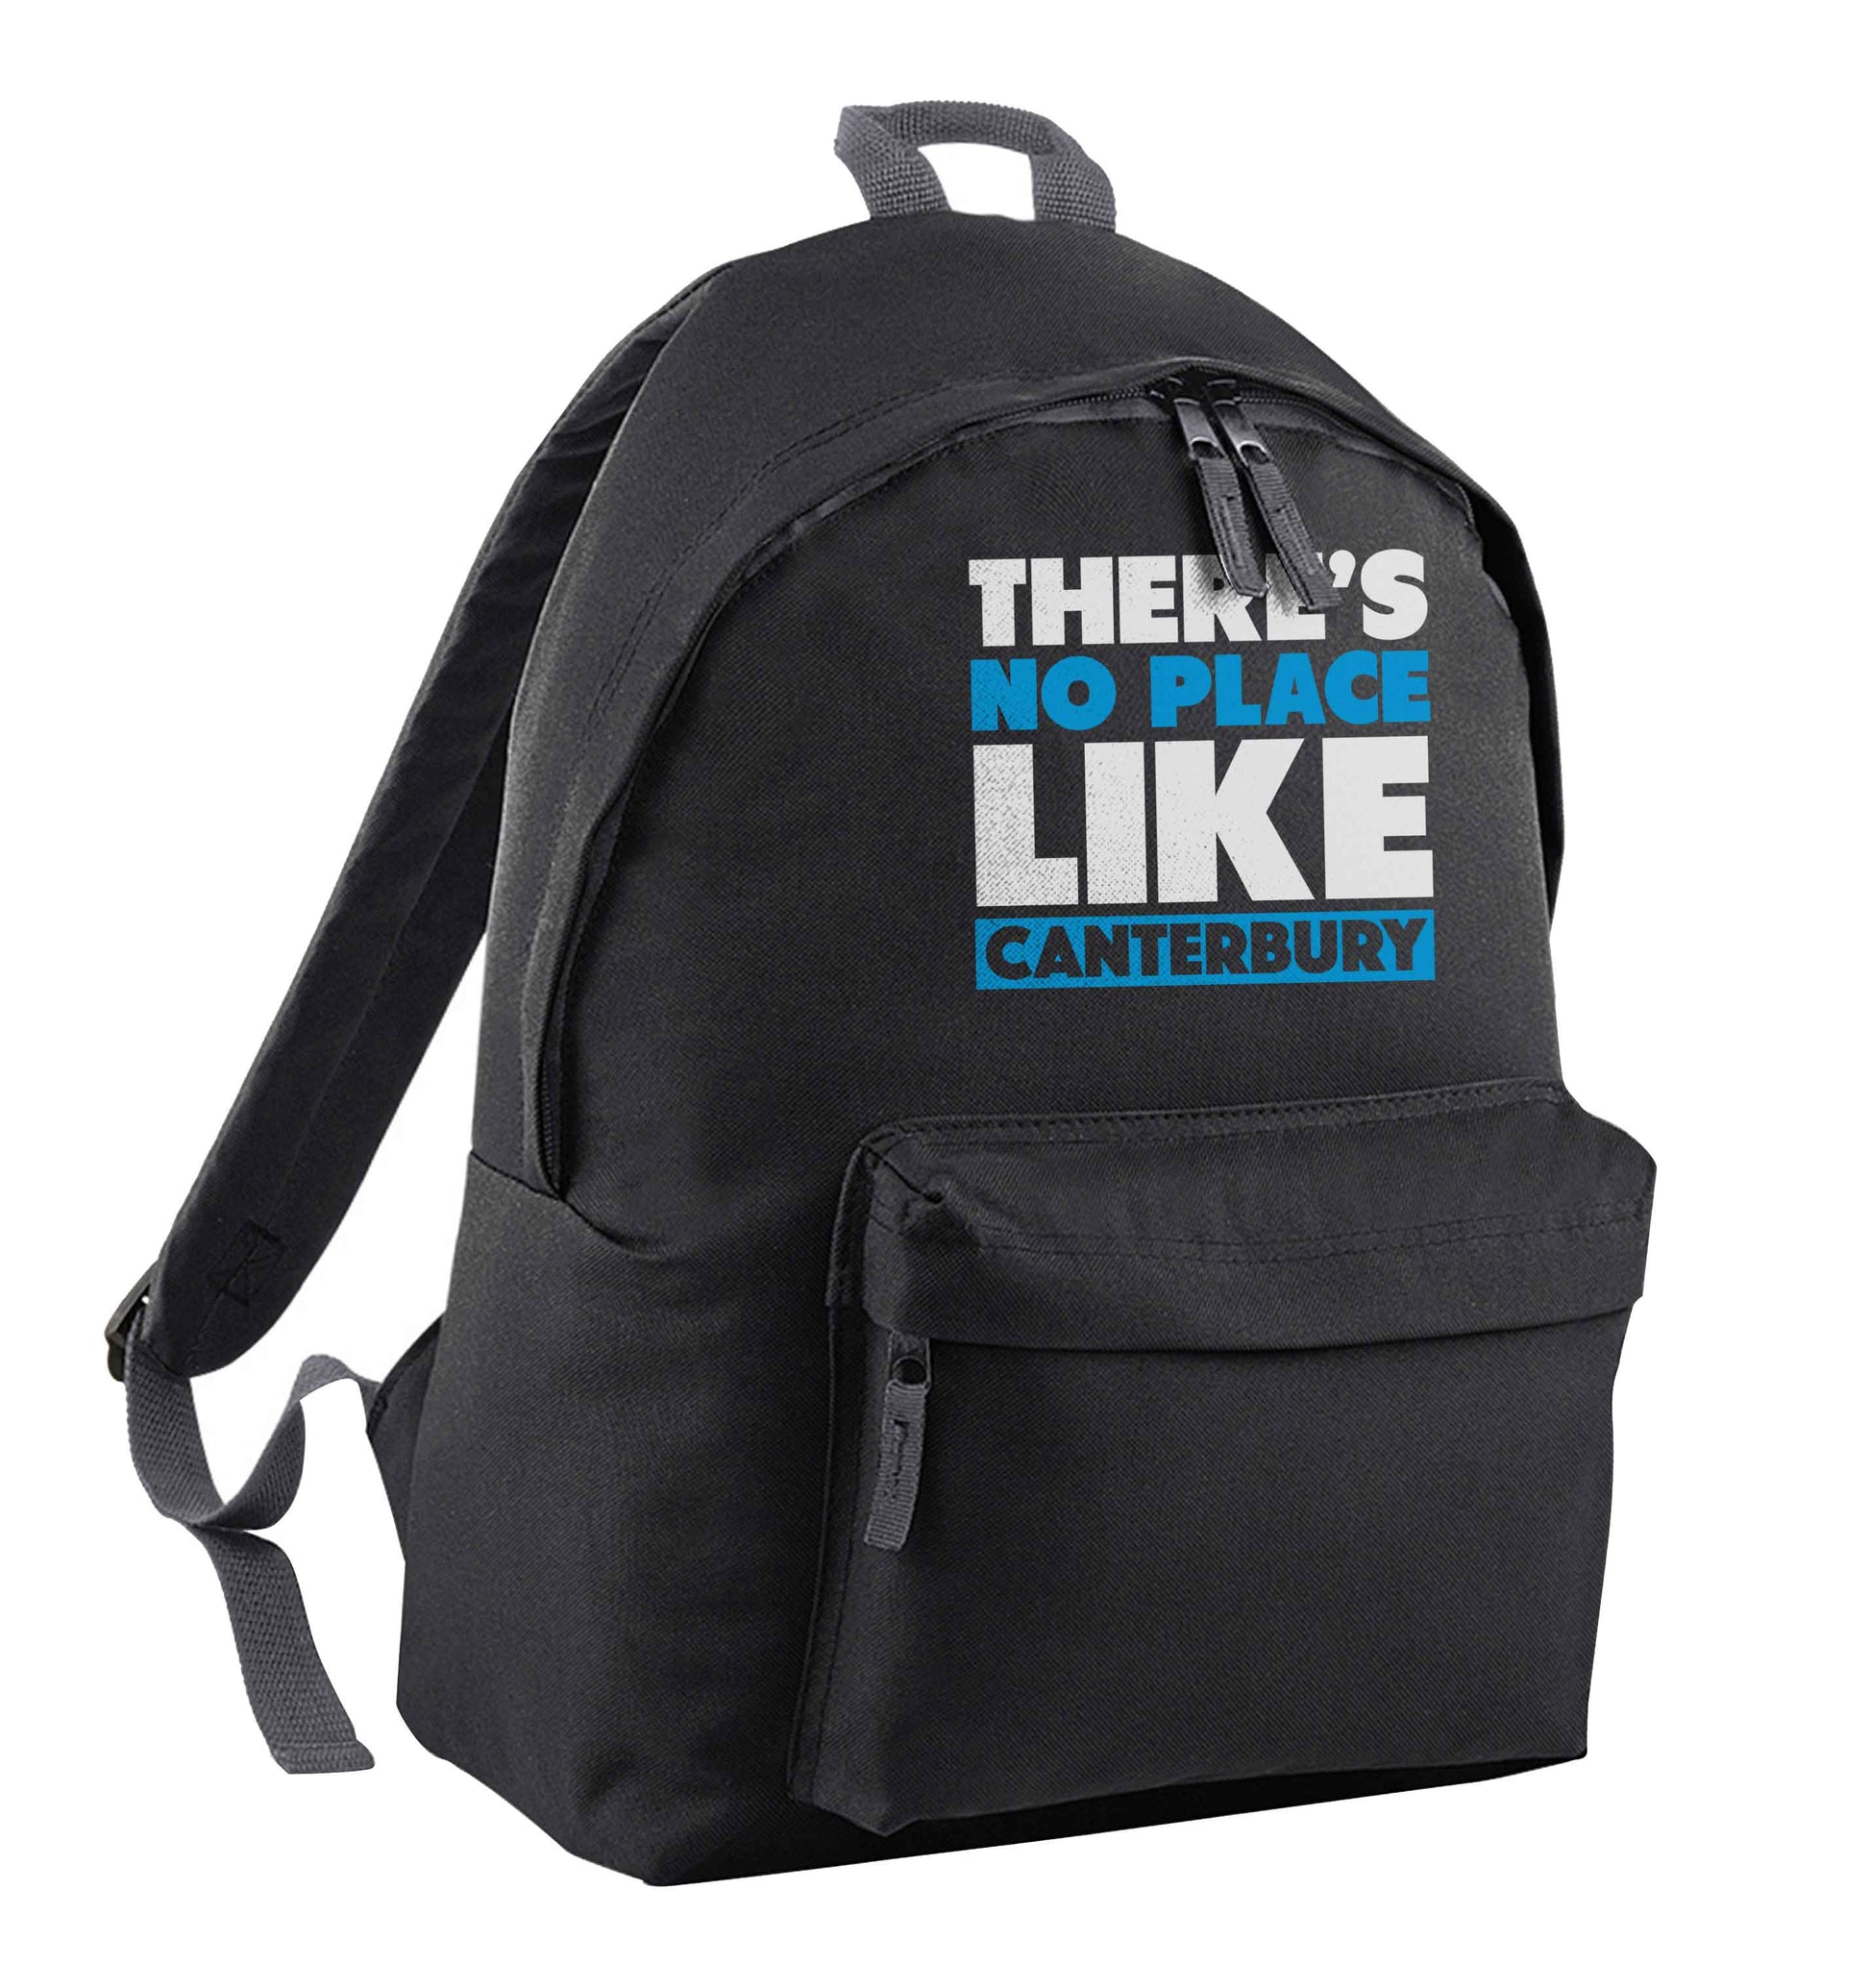 There's no place like Canterbury black children's backpack